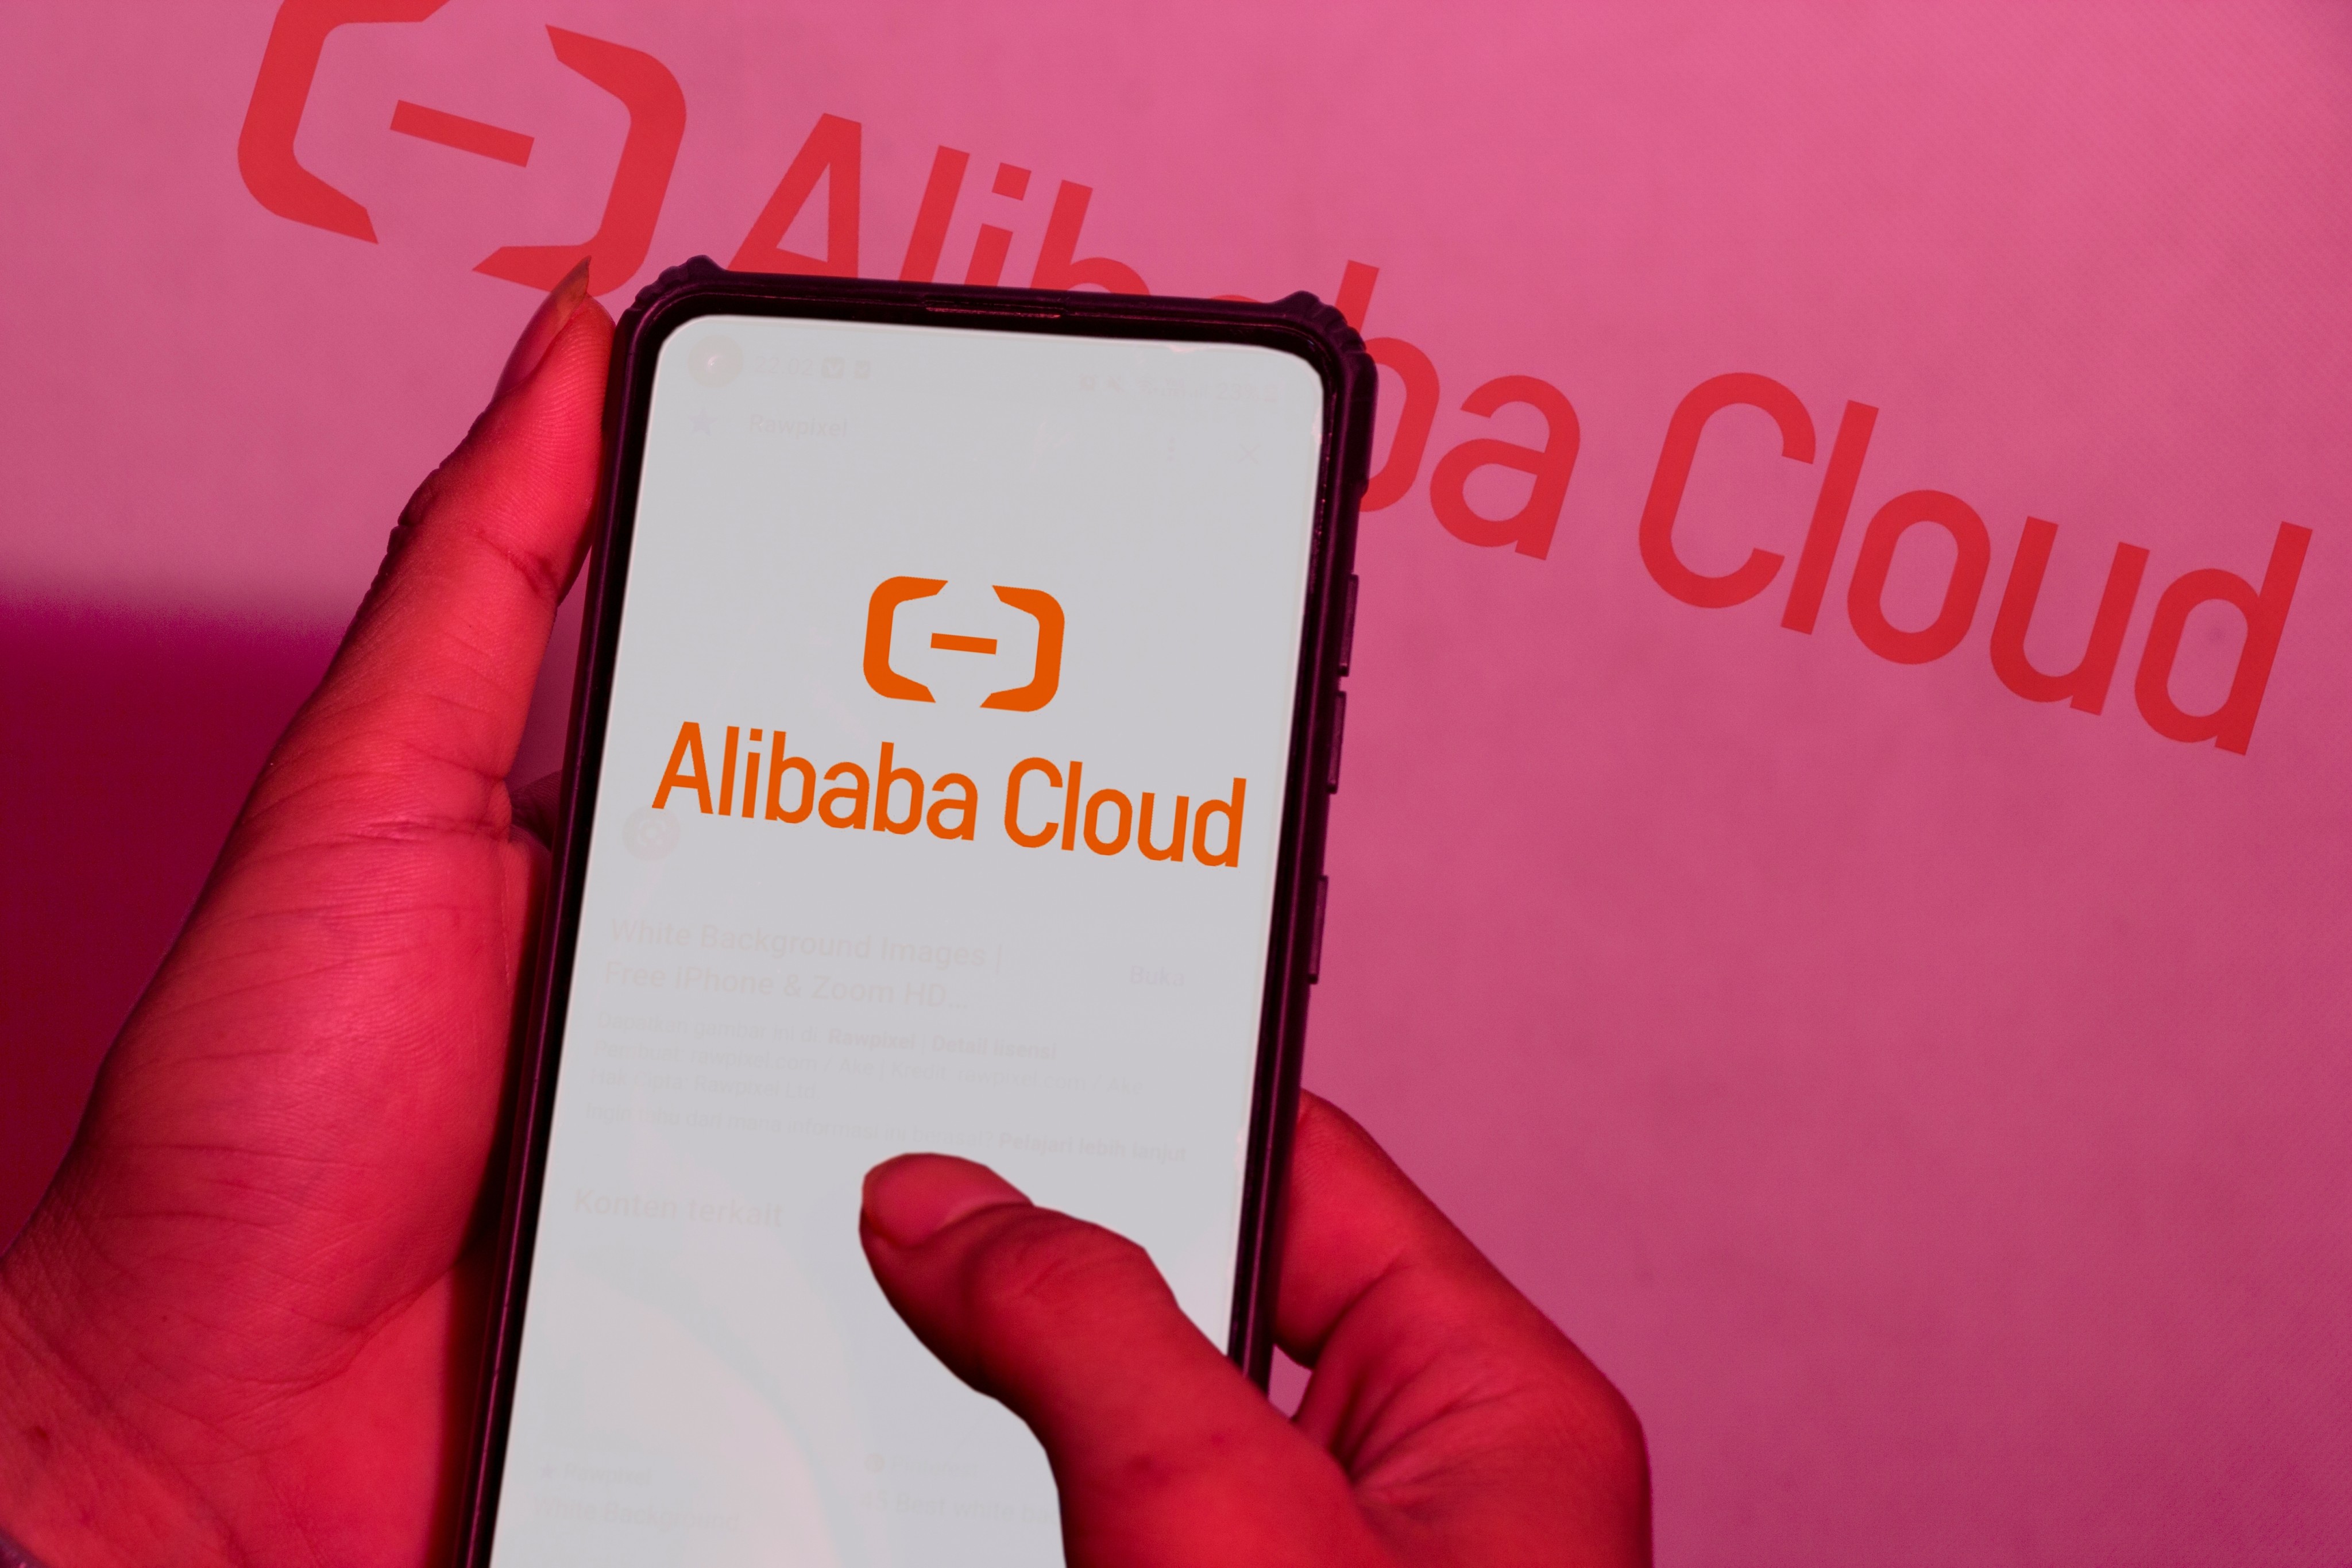 Alibaba Cloud is cutting 7 per cent of its staff amid a tough economic environment as it prepares for an IPO. Photo: Shutterstock